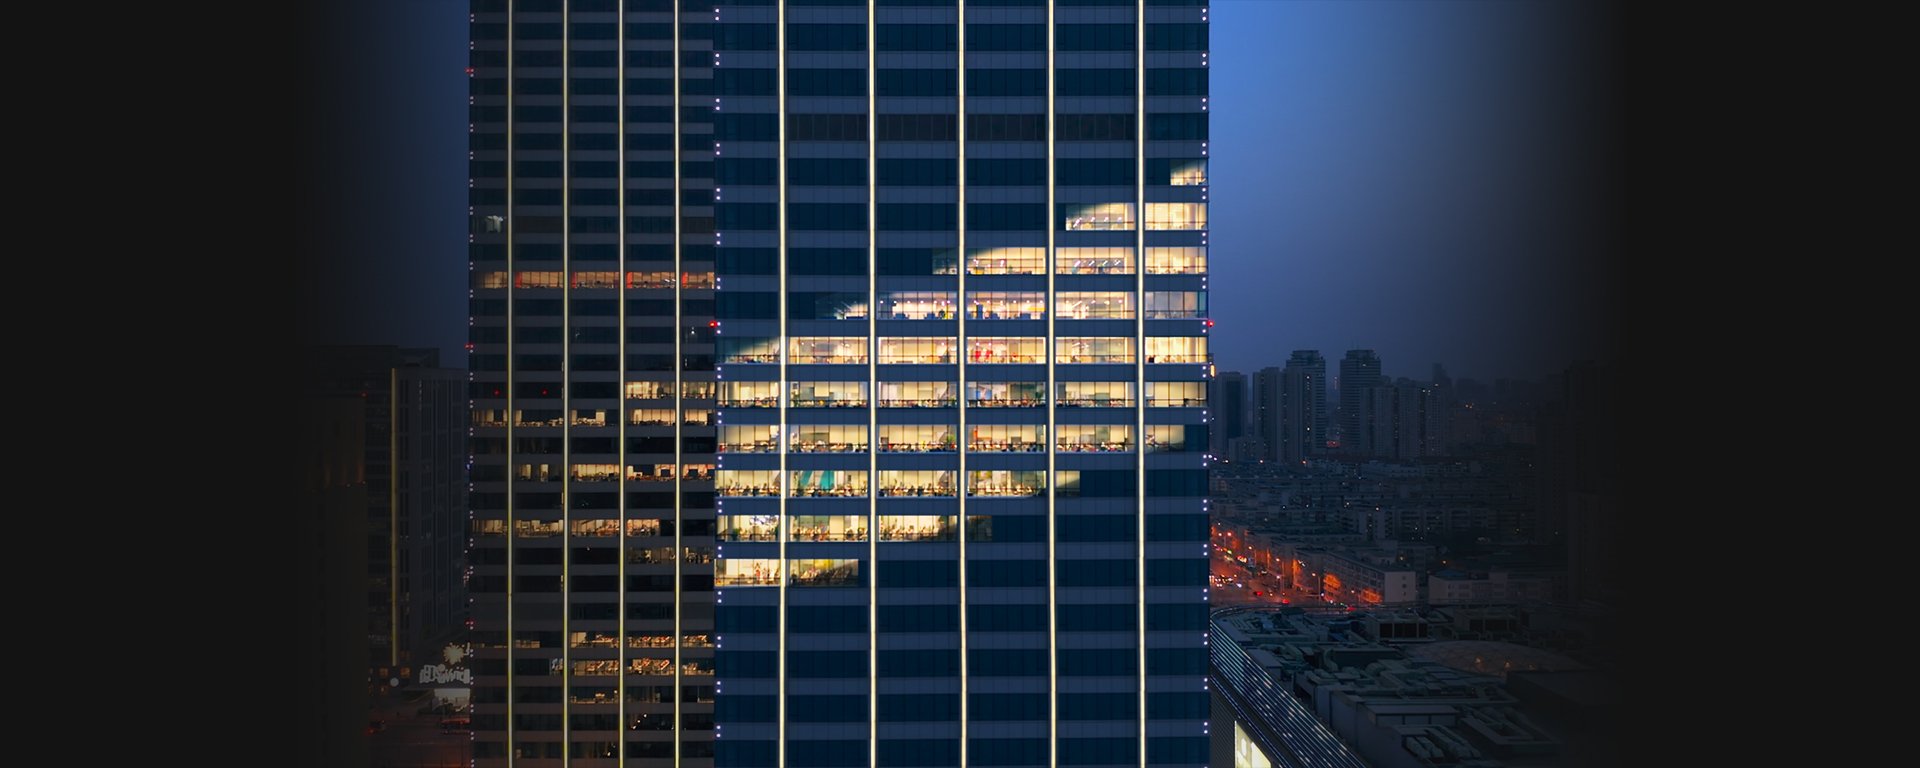 Building with the shape of the Baird logo in lights.